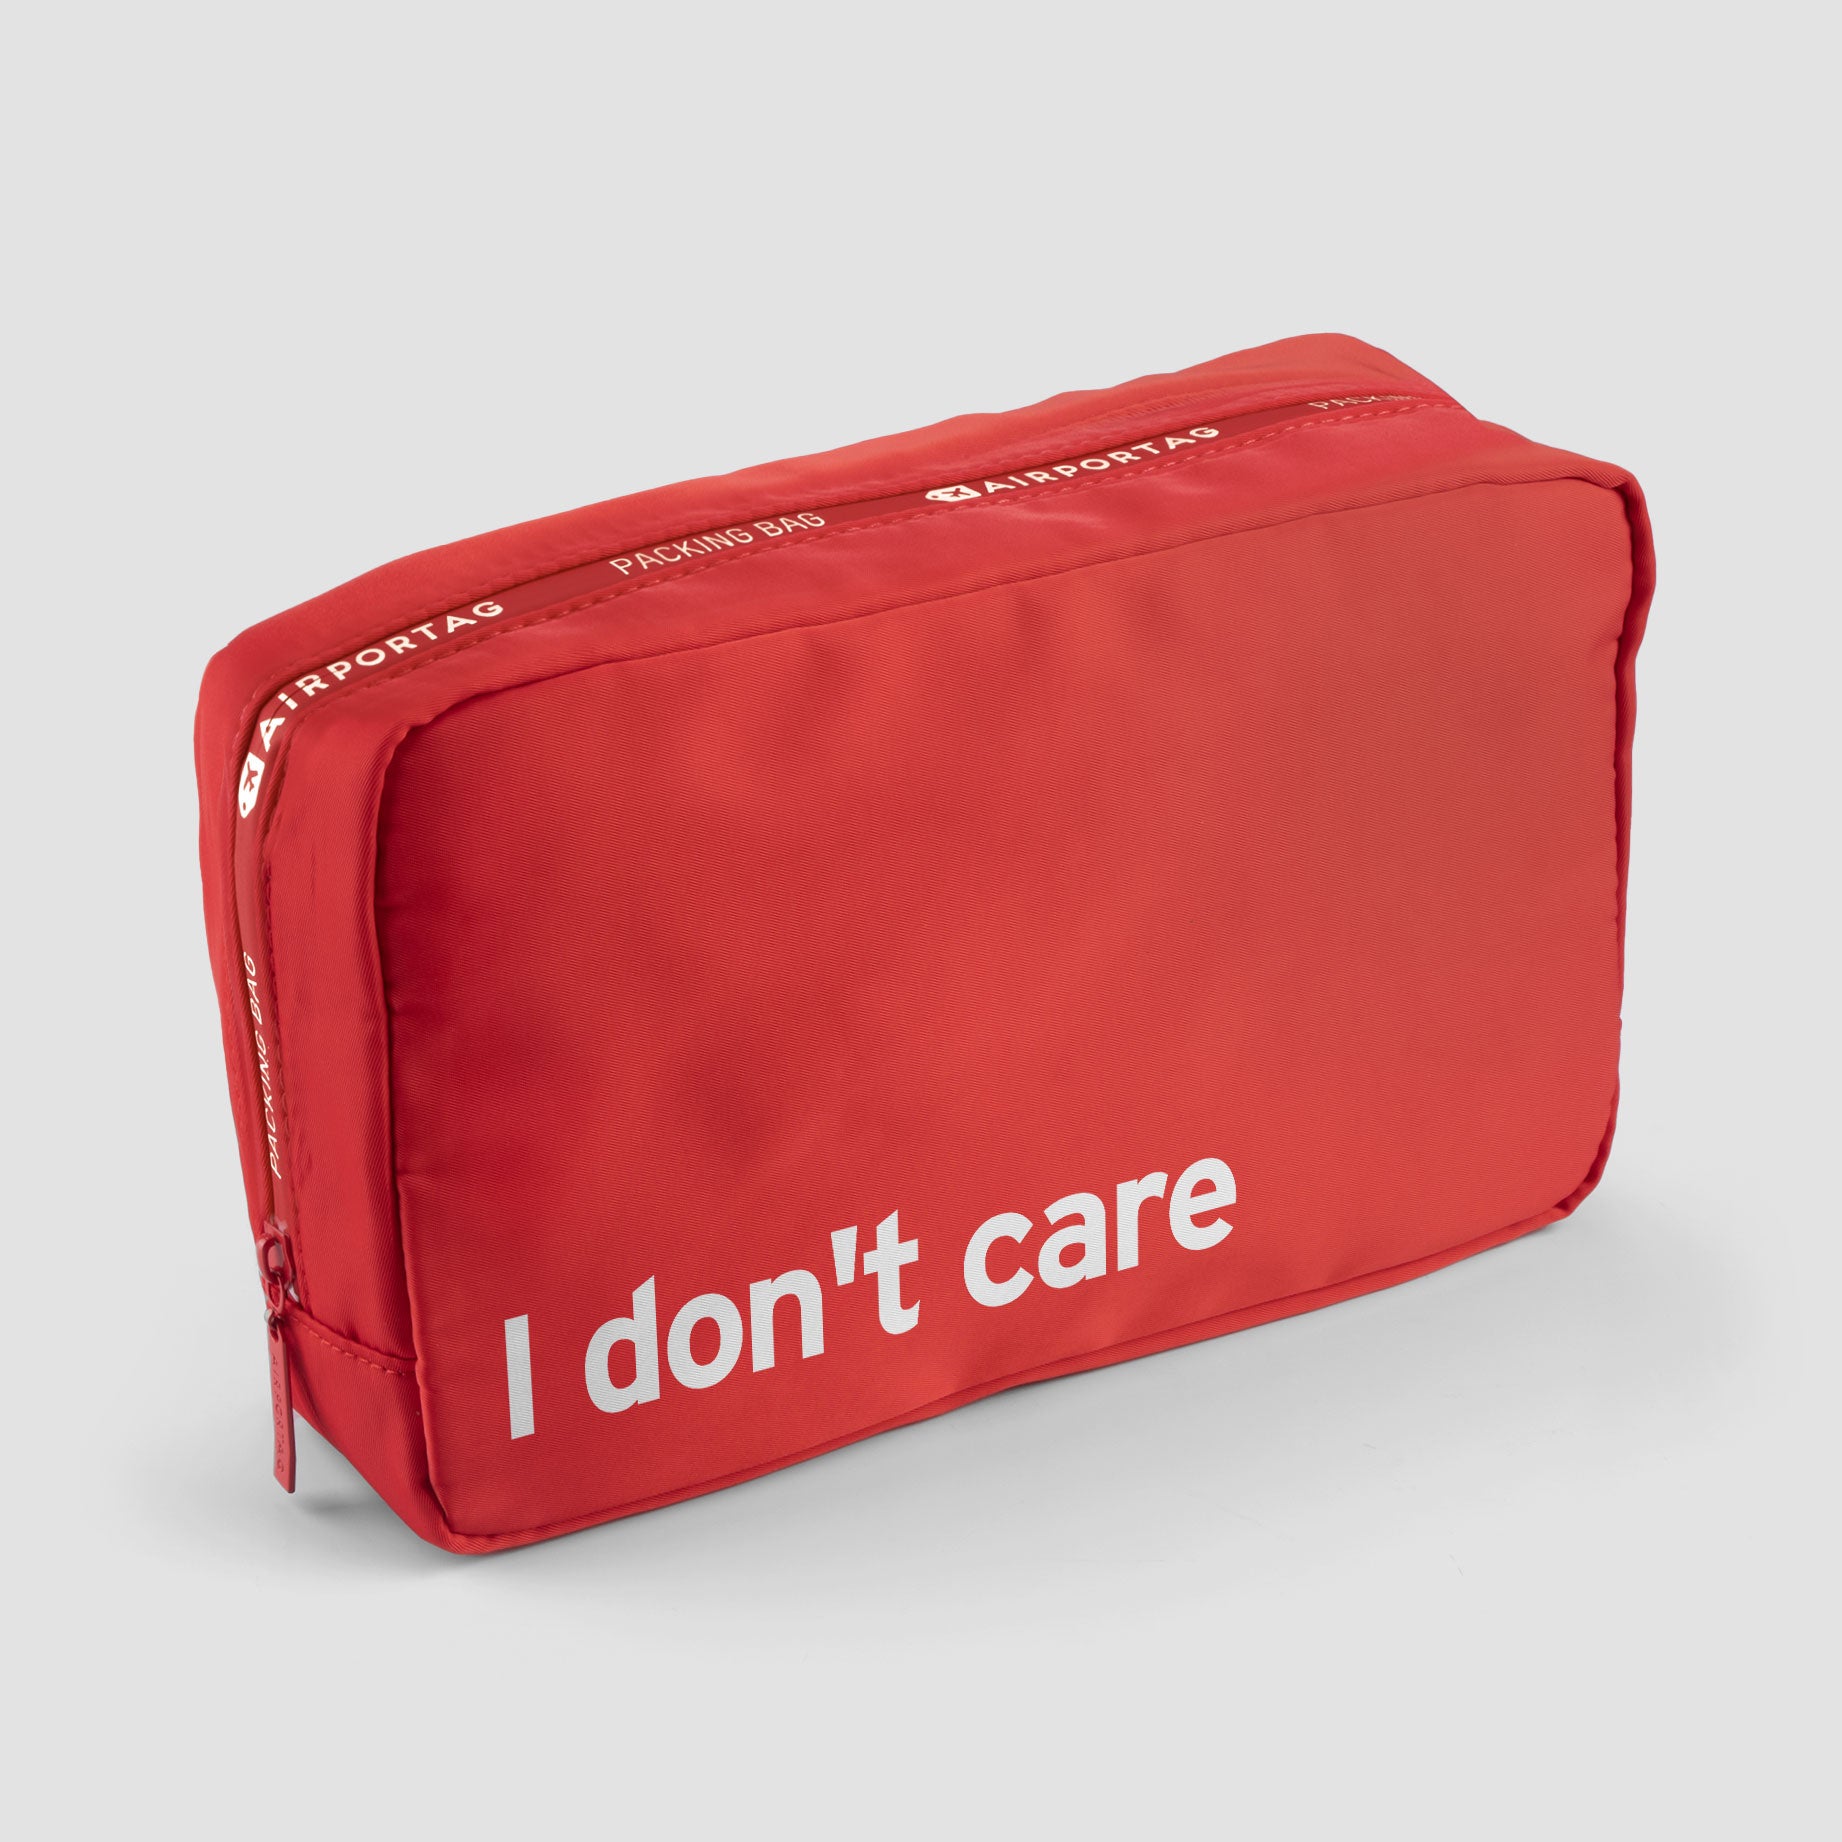 I Don't Care - Packing Bag